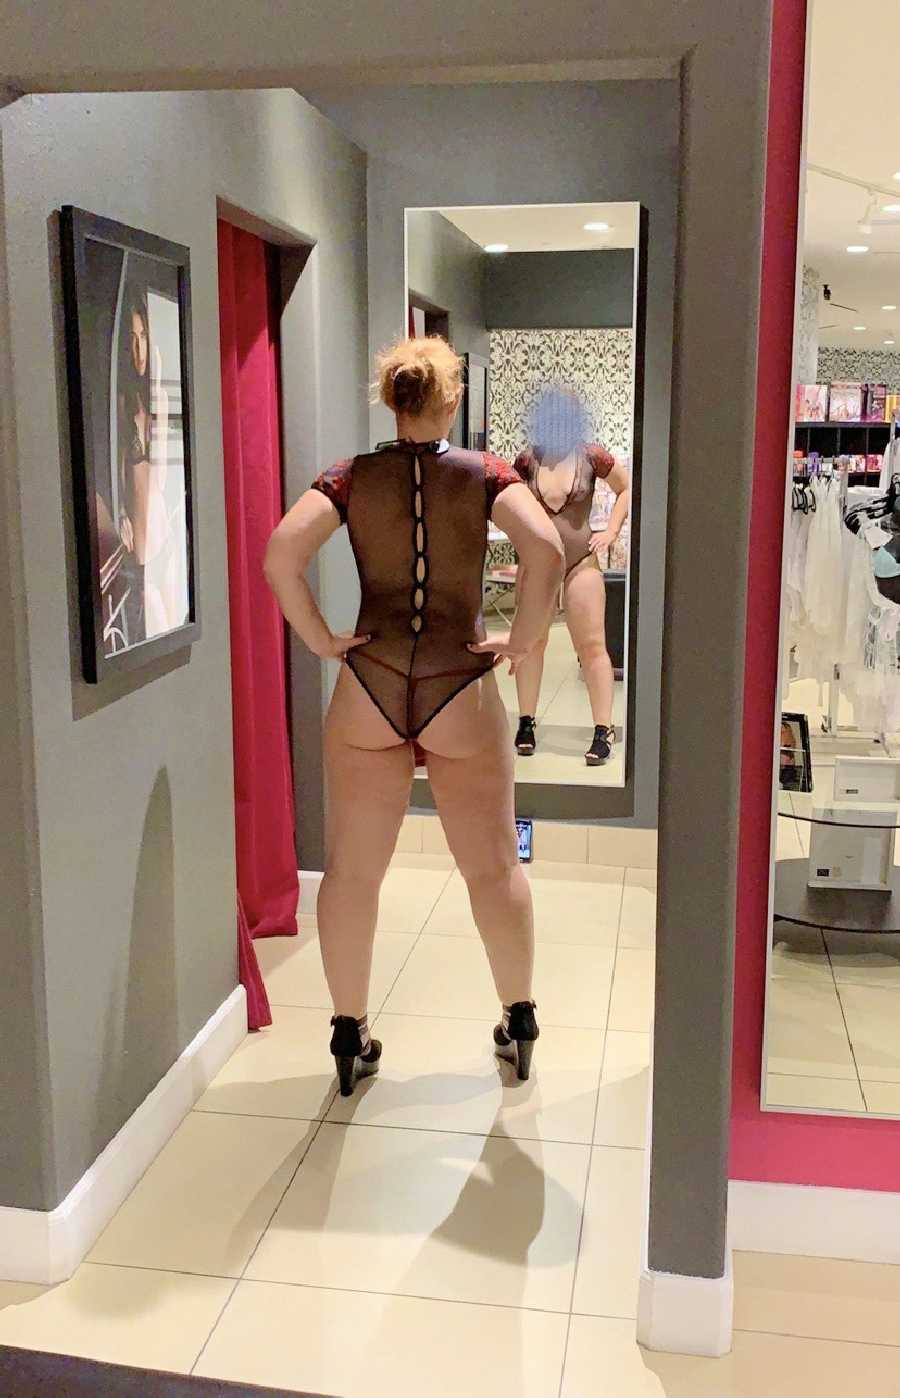 Amateur Wifes On Display at the Lingerie Store 3